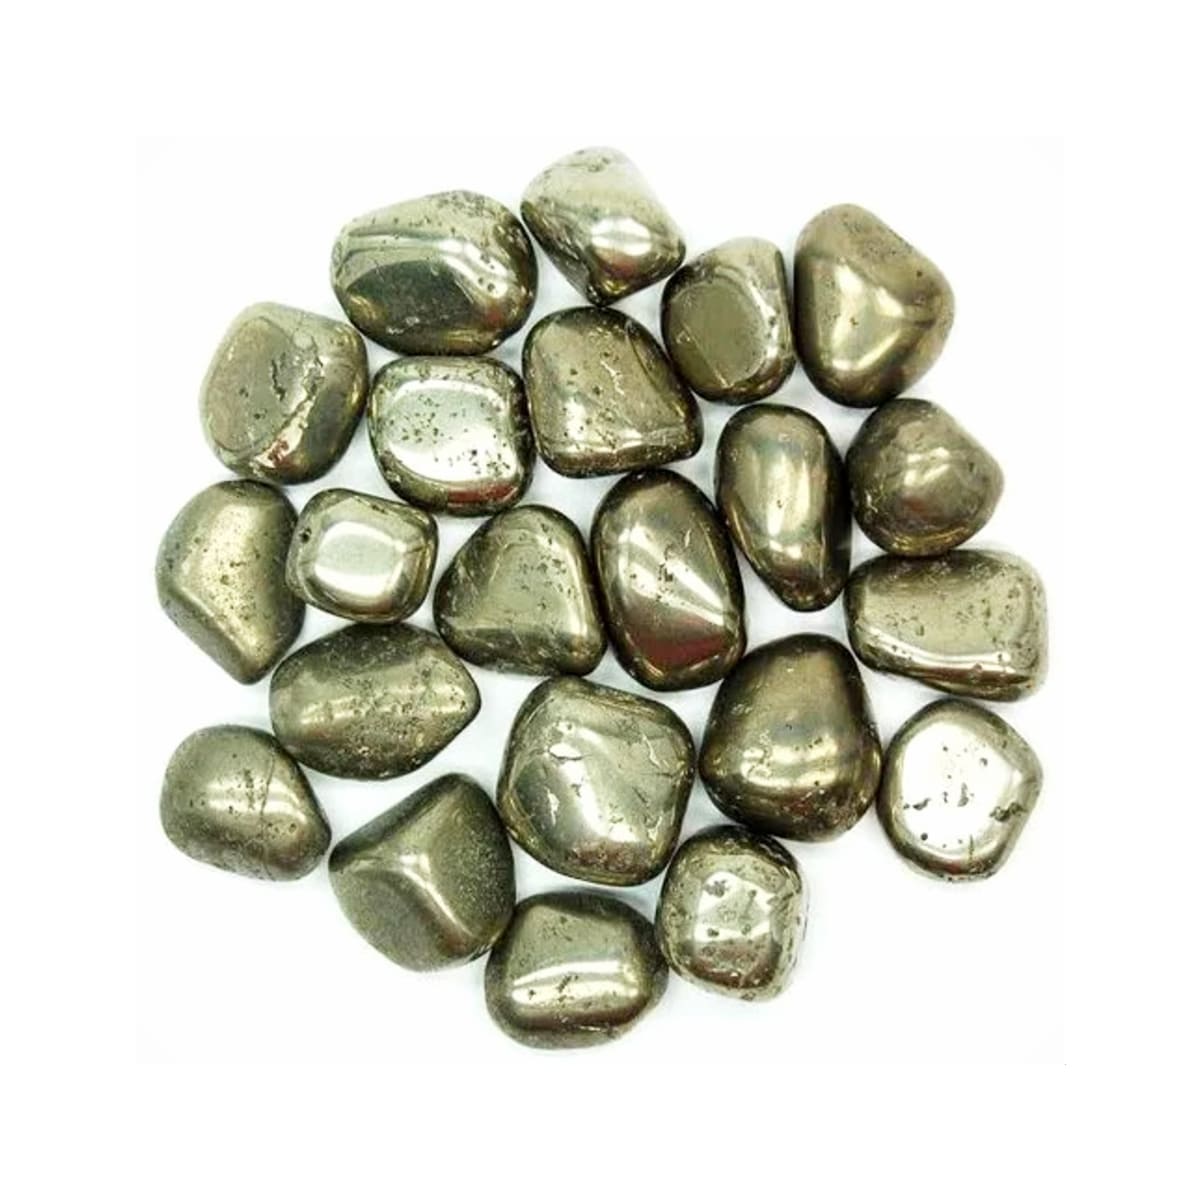 Pyrite Tumbled Crystals